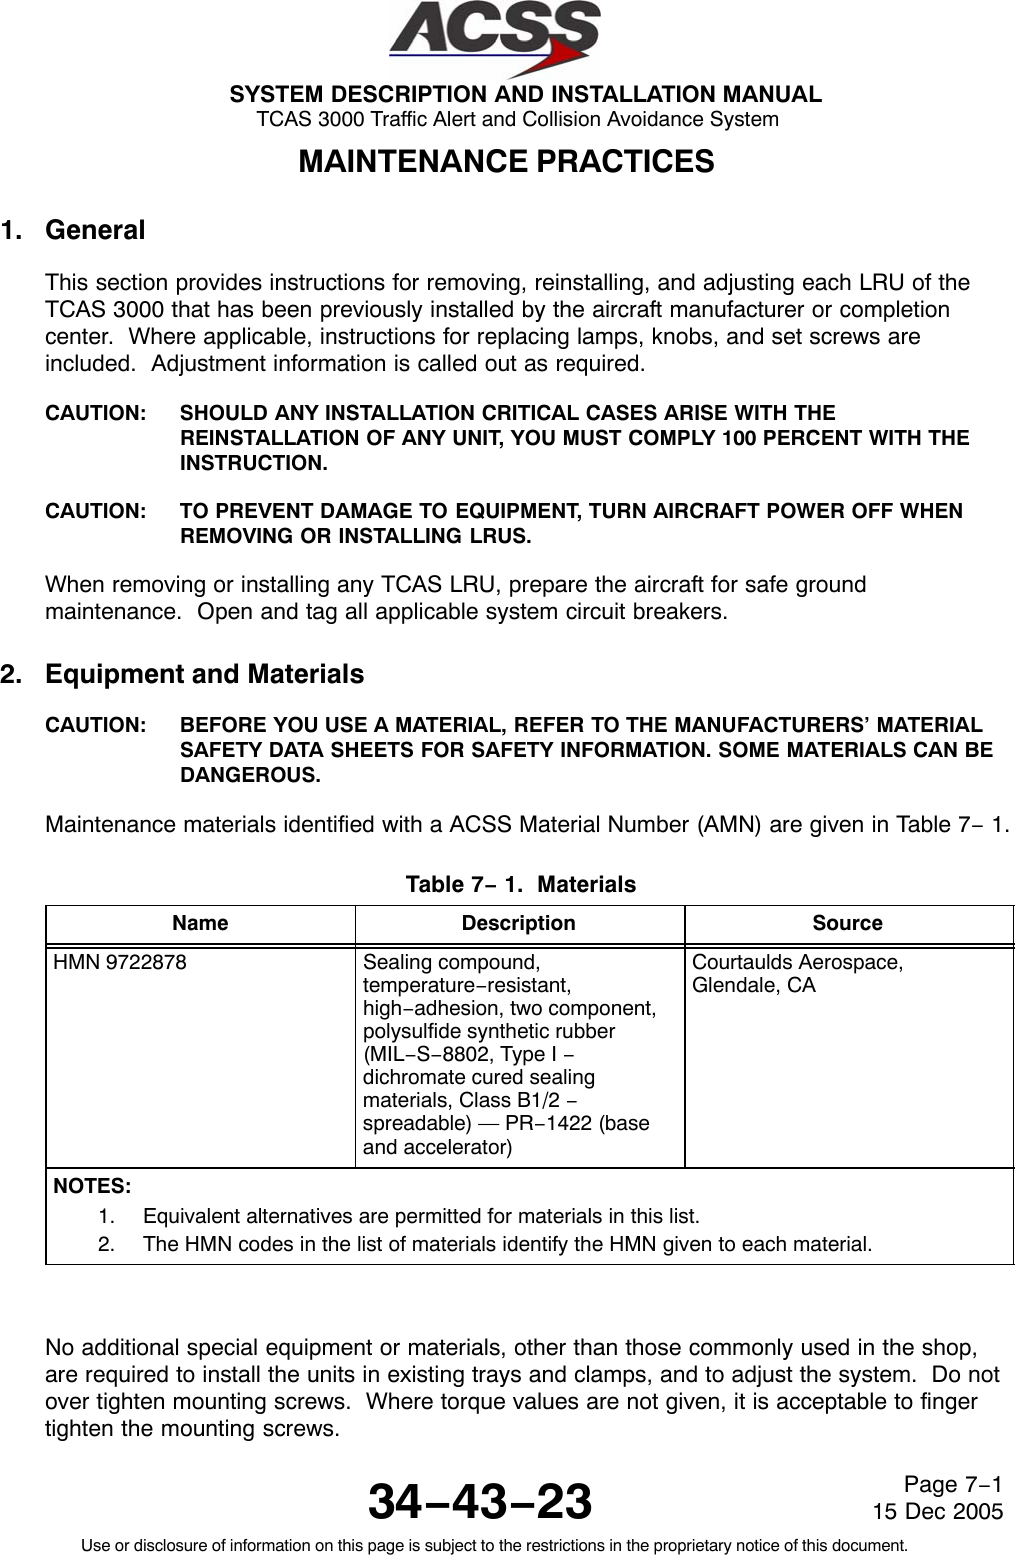 SYSTEM DESCRIPTION AND INSTALLATION MANUAL TCAS 3000 Traffic Alert and Collision Avoidance System34−43−23Use or disclosure of information on this page is subject to the restrictions in the proprietary notice of this document.Page 7−115 Dec 2005MAINTENANCE PRACTICES1. GeneralThis section provides instructions for removing, reinstalling, and adjusting each LRU of theTCAS 3000 that has been previously installed by the aircraft manufacturer or completioncenter.  Where applicable, instructions for replacing lamps, knobs, and set screws areincluded.  Adjustment information is called out as required.CAUTION: SHOULD ANY INSTALLATION CRITICAL CASES ARISE WITH THEREINSTALLATION OF ANY UNIT, YOU MUST COMPLY 100 PERCENT WITH THEINSTRUCTION.CAUTION: TO PREVENT DAMAGE TO EQUIPMENT, TURN AIRCRAFT POWER OFF WHENREMOVING OR INSTALLING LRUS.When removing or installing any TCAS LRU, prepare the aircraft for safe groundmaintenance.  Open and tag all applicable system circuit breakers.2. Equipment and MaterialsCAUTION: BEFORE YOU USE A MATERIAL, REFER TO THE MANUFACTURERS’ MATERIALSAFETY DATA SHEETS FOR SAFETY INFORMATION. SOME MATERIALS CAN BEDANGEROUS.Maintenance materials identified with a ACSS Material Number (AMN) are given in Table 7− 1.Table 7− 1.  Materials  Name Description SourceHMN 9722878 Sealing compound,temperature−resistant,high−adhesion, two component,polysulfide synthetic rubber(MIL−S−8802, Type I −dichromate cured sealingmaterials, Class B1/2 −spreadable) — PR−1422 (baseand accelerator)Courtaulds Aerospace,Glendale, CANOTES:1. Equivalent alternatives are permitted for materials in this list.2. The HMN codes in the list of materials identify the HMN given to each material.No additional special equipment or materials, other than those commonly used in the shop,are required to install the units in existing trays and clamps, and to adjust the system.  Do notover tighten mounting screws.  Where torque values are not given, it is acceptable to fingertighten the mounting screws.